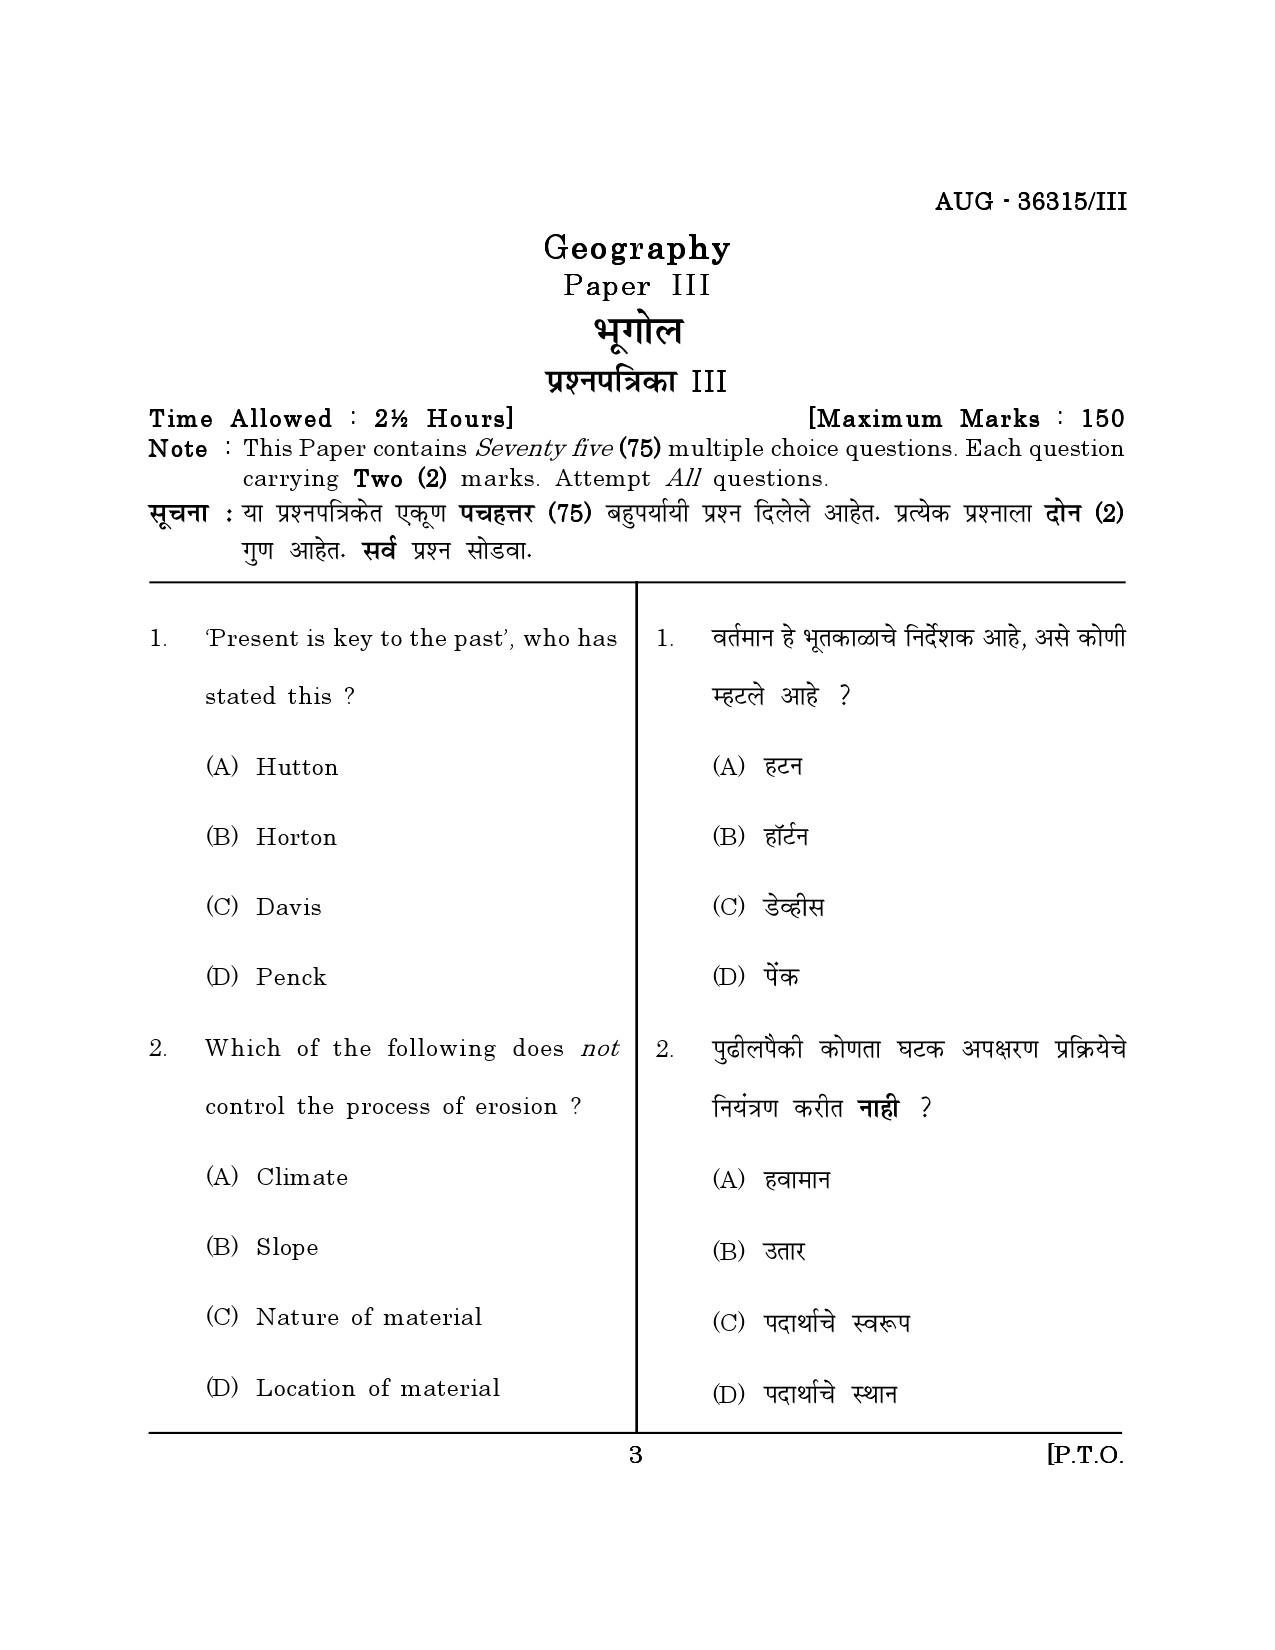 Maharashtra SET Geography Question Paper III August 2015 2